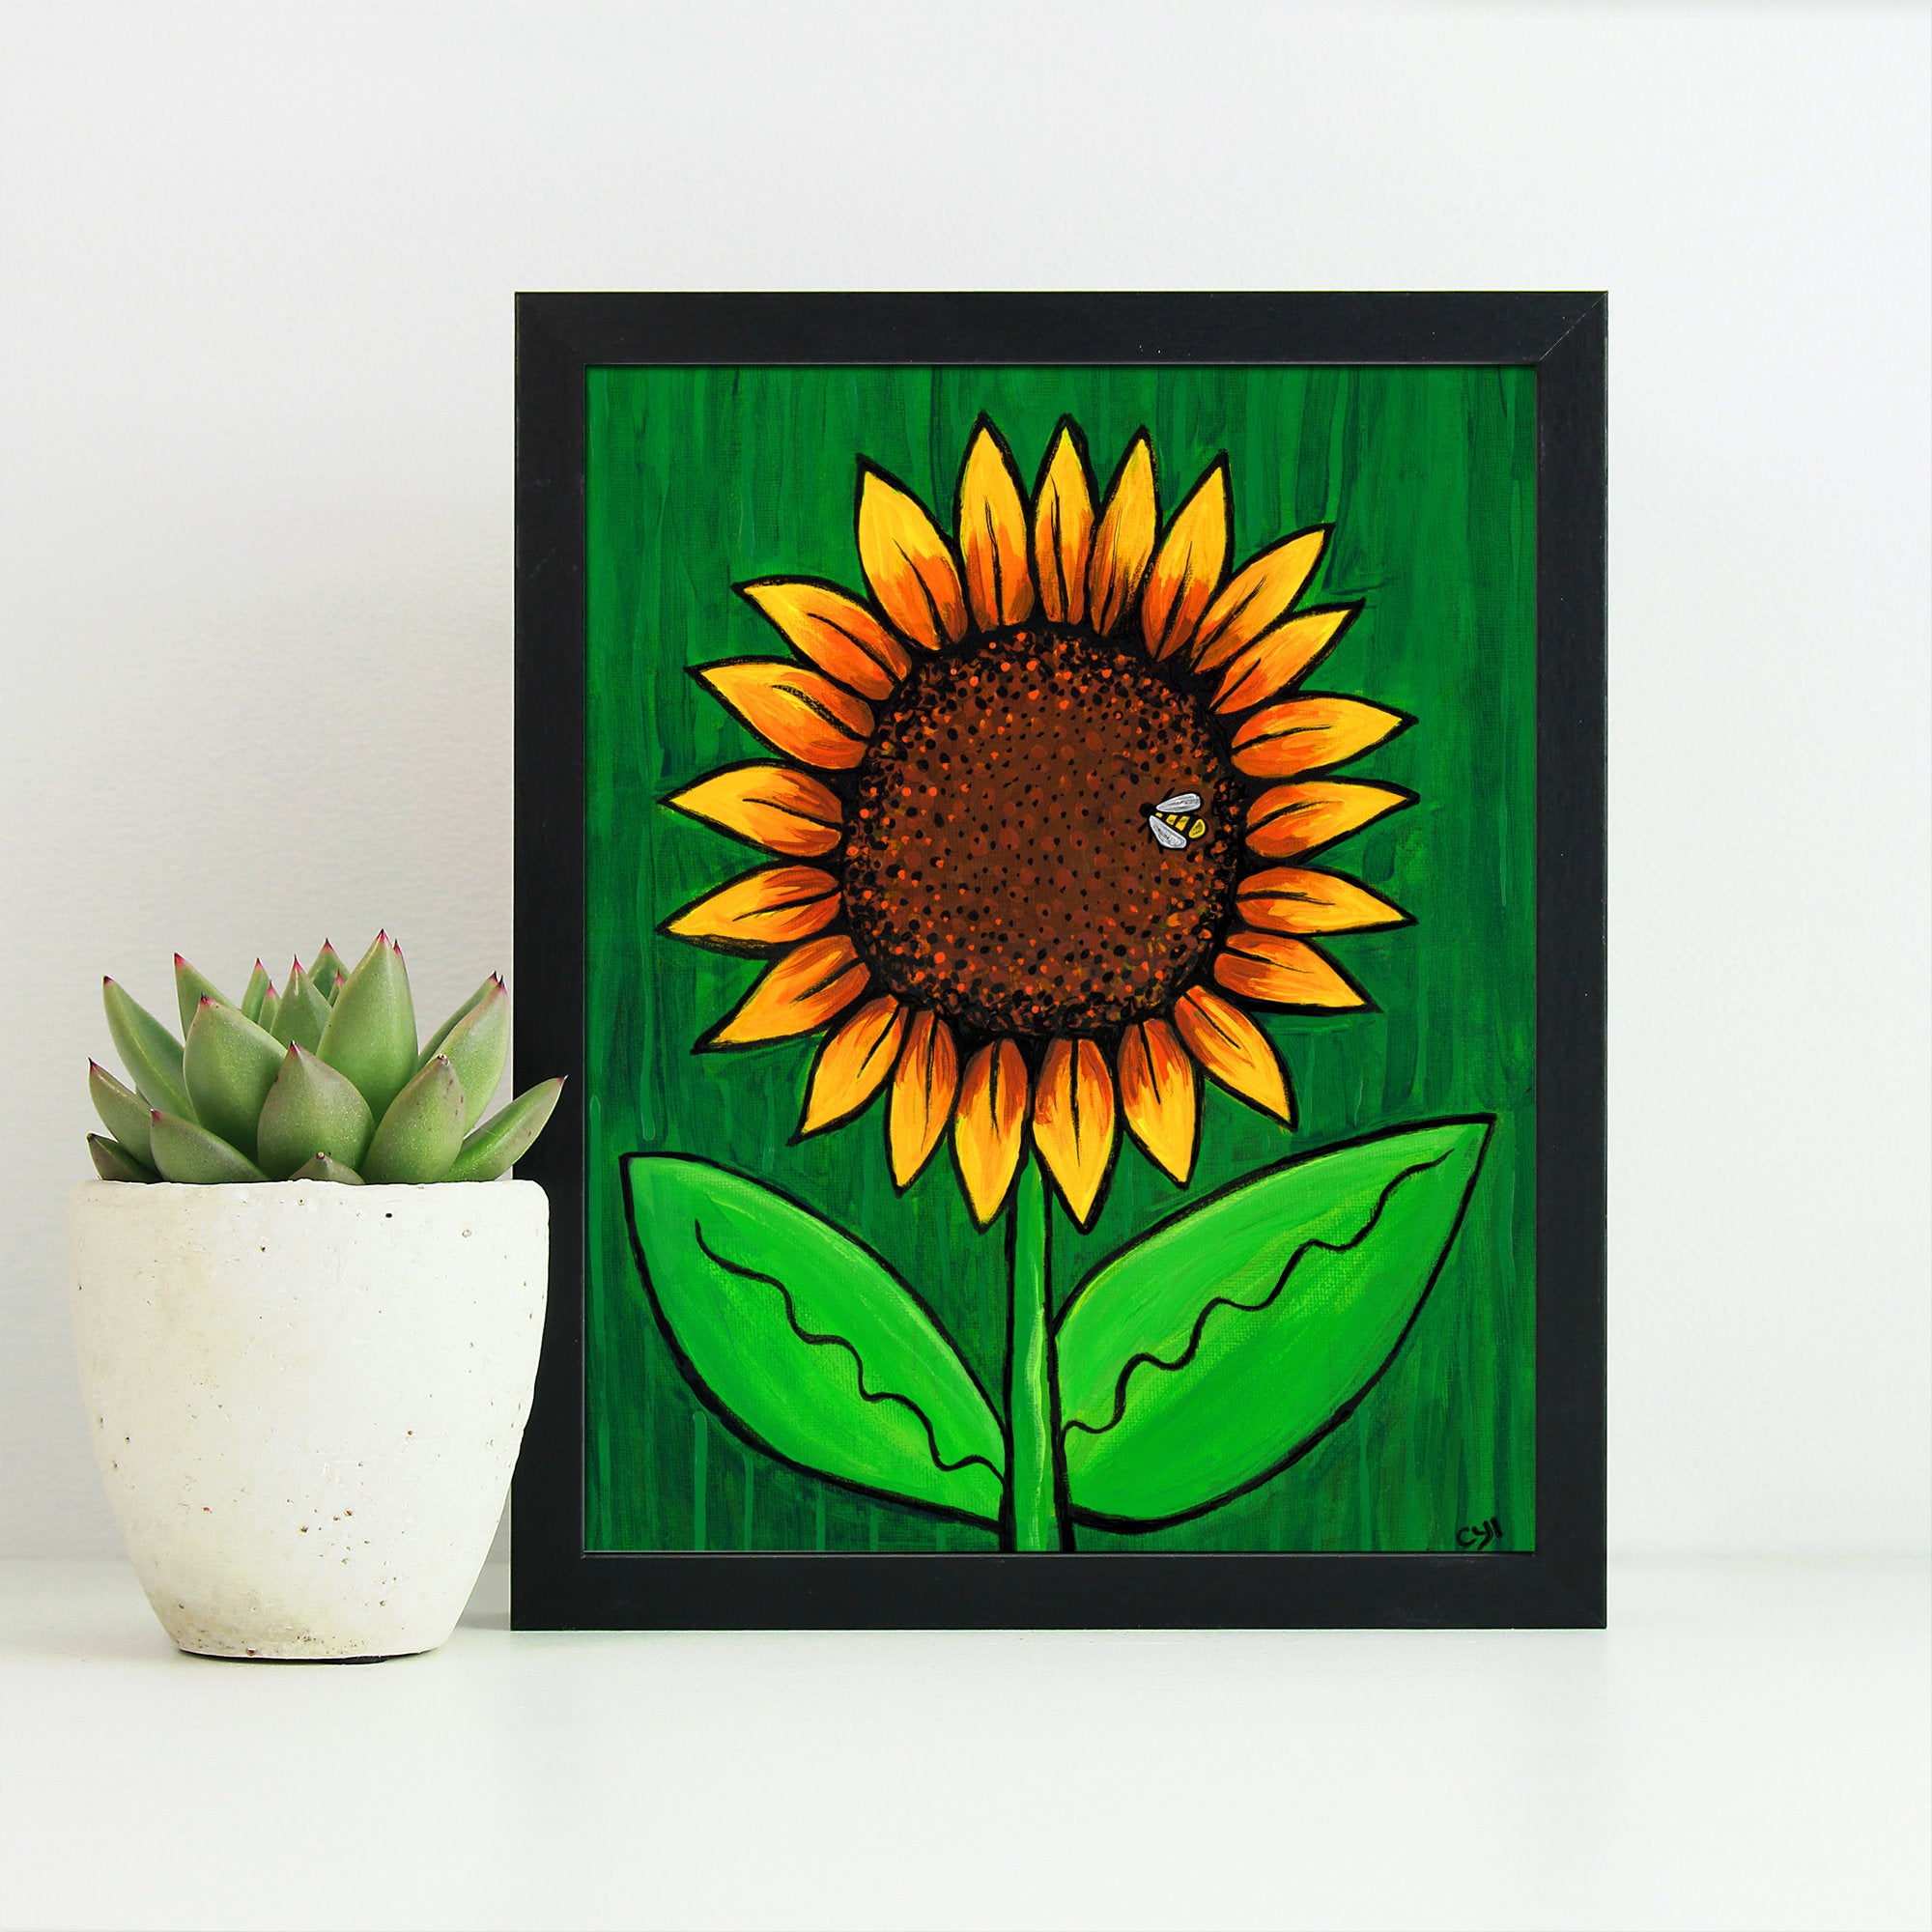 Bee on Sunflower Print - Happy Sun Flower with HoneyBee Art Print - Pollinator - 8x10 inches with optional black mat by Claudine Intner